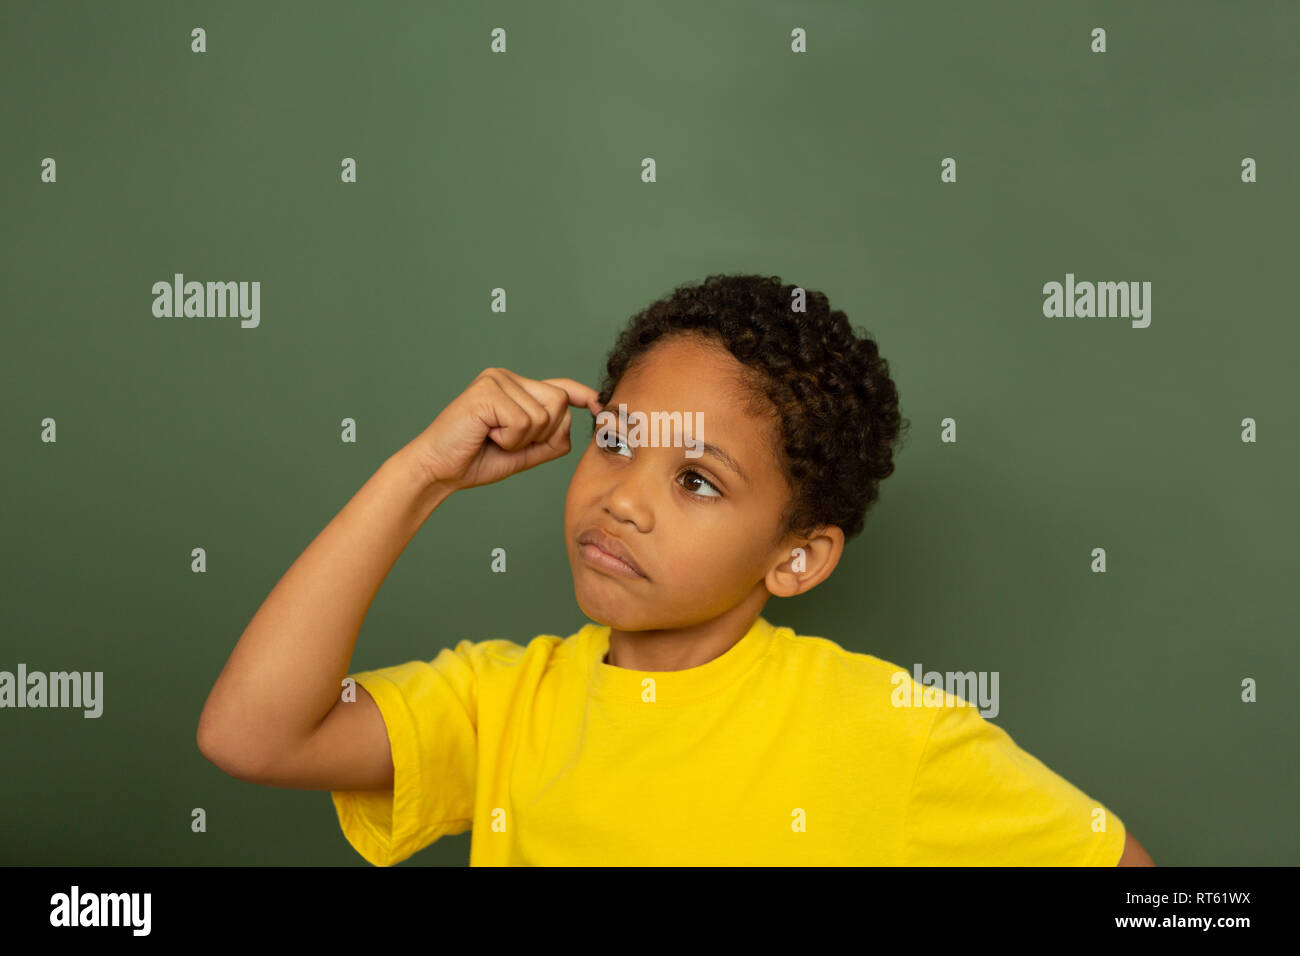 Thoughtful schoolboy with finger pointing to head standing against greenboard Stock Photo